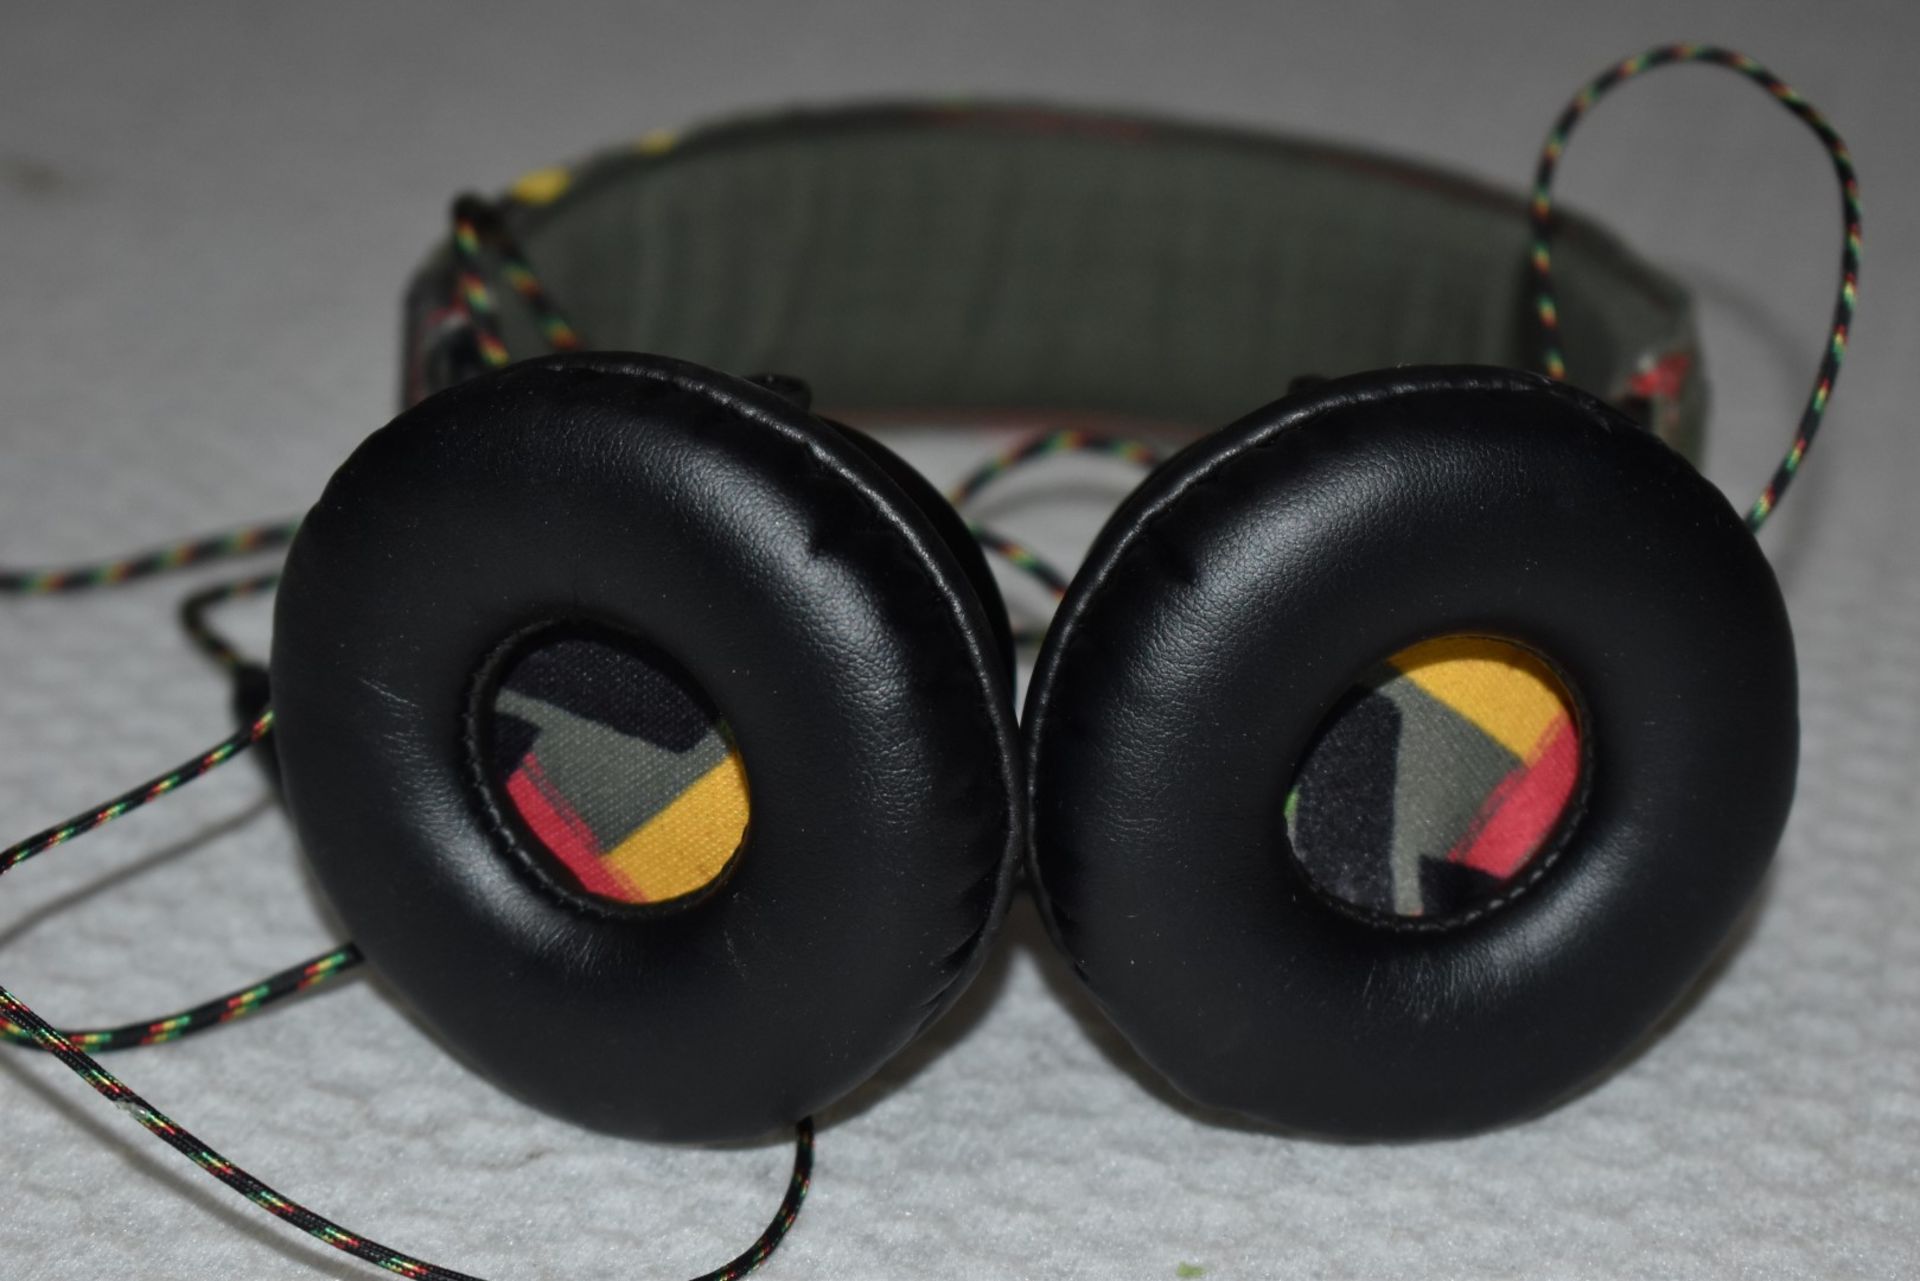 1 x House of Marley Rasta Revolution On Ear Headphones - Includes Original Box - Light Use Only - - Image 7 of 9